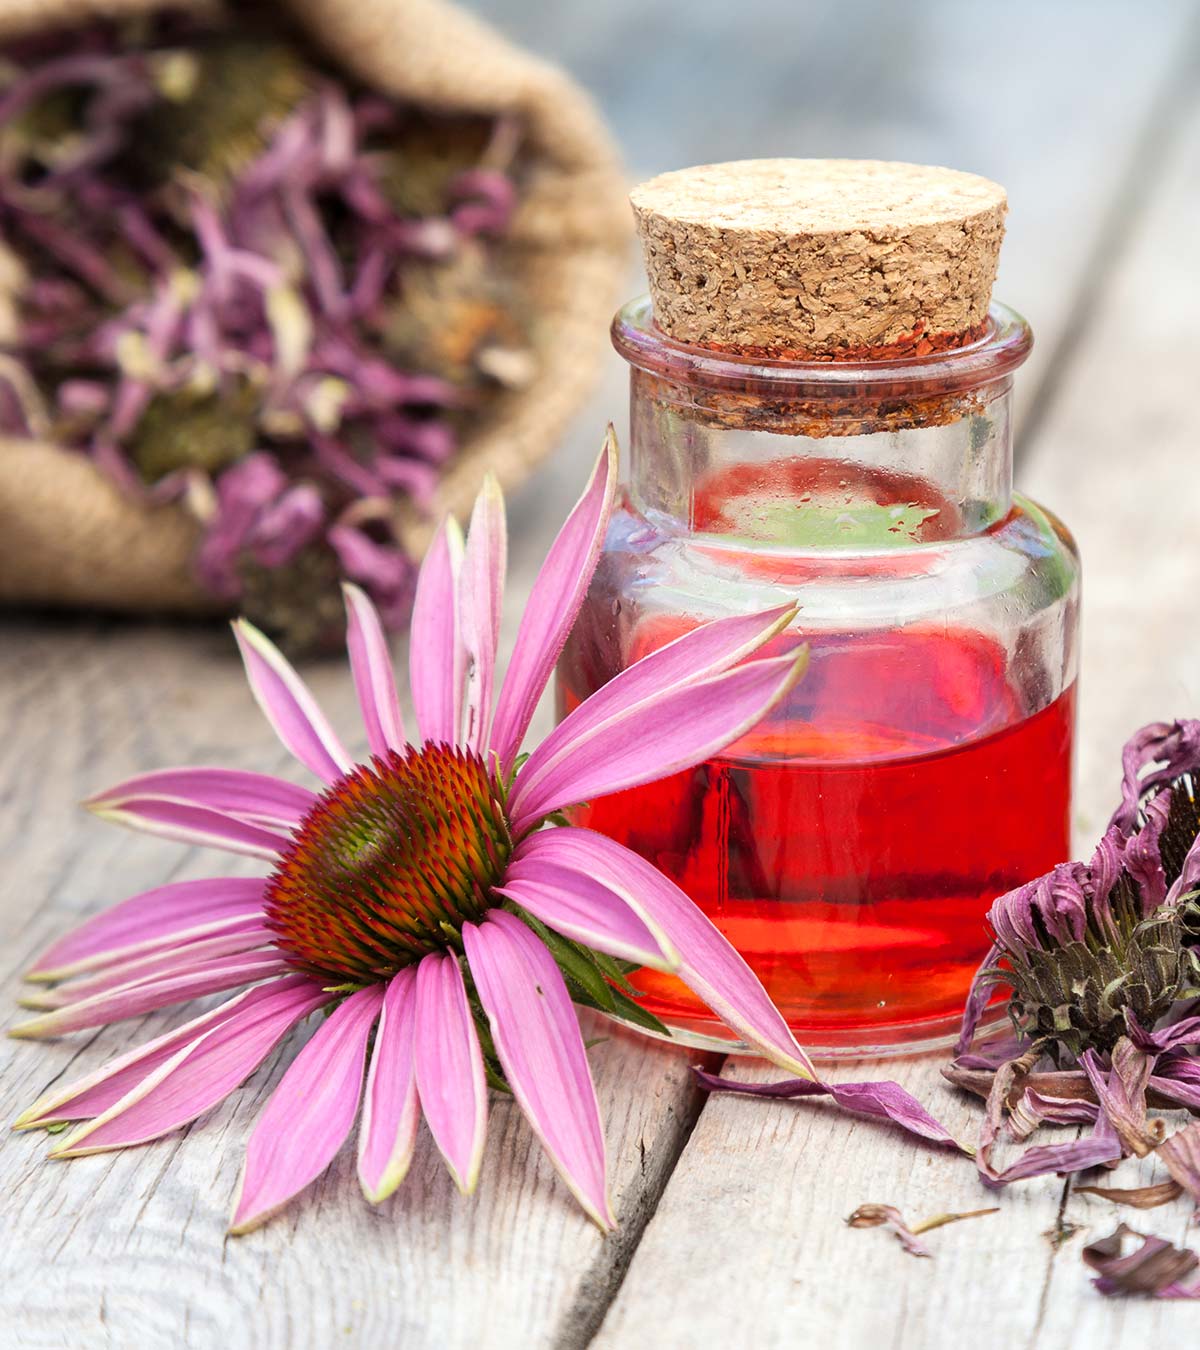 Echinacea When Breastfeeding: Safety, Benefits, And Side Effects